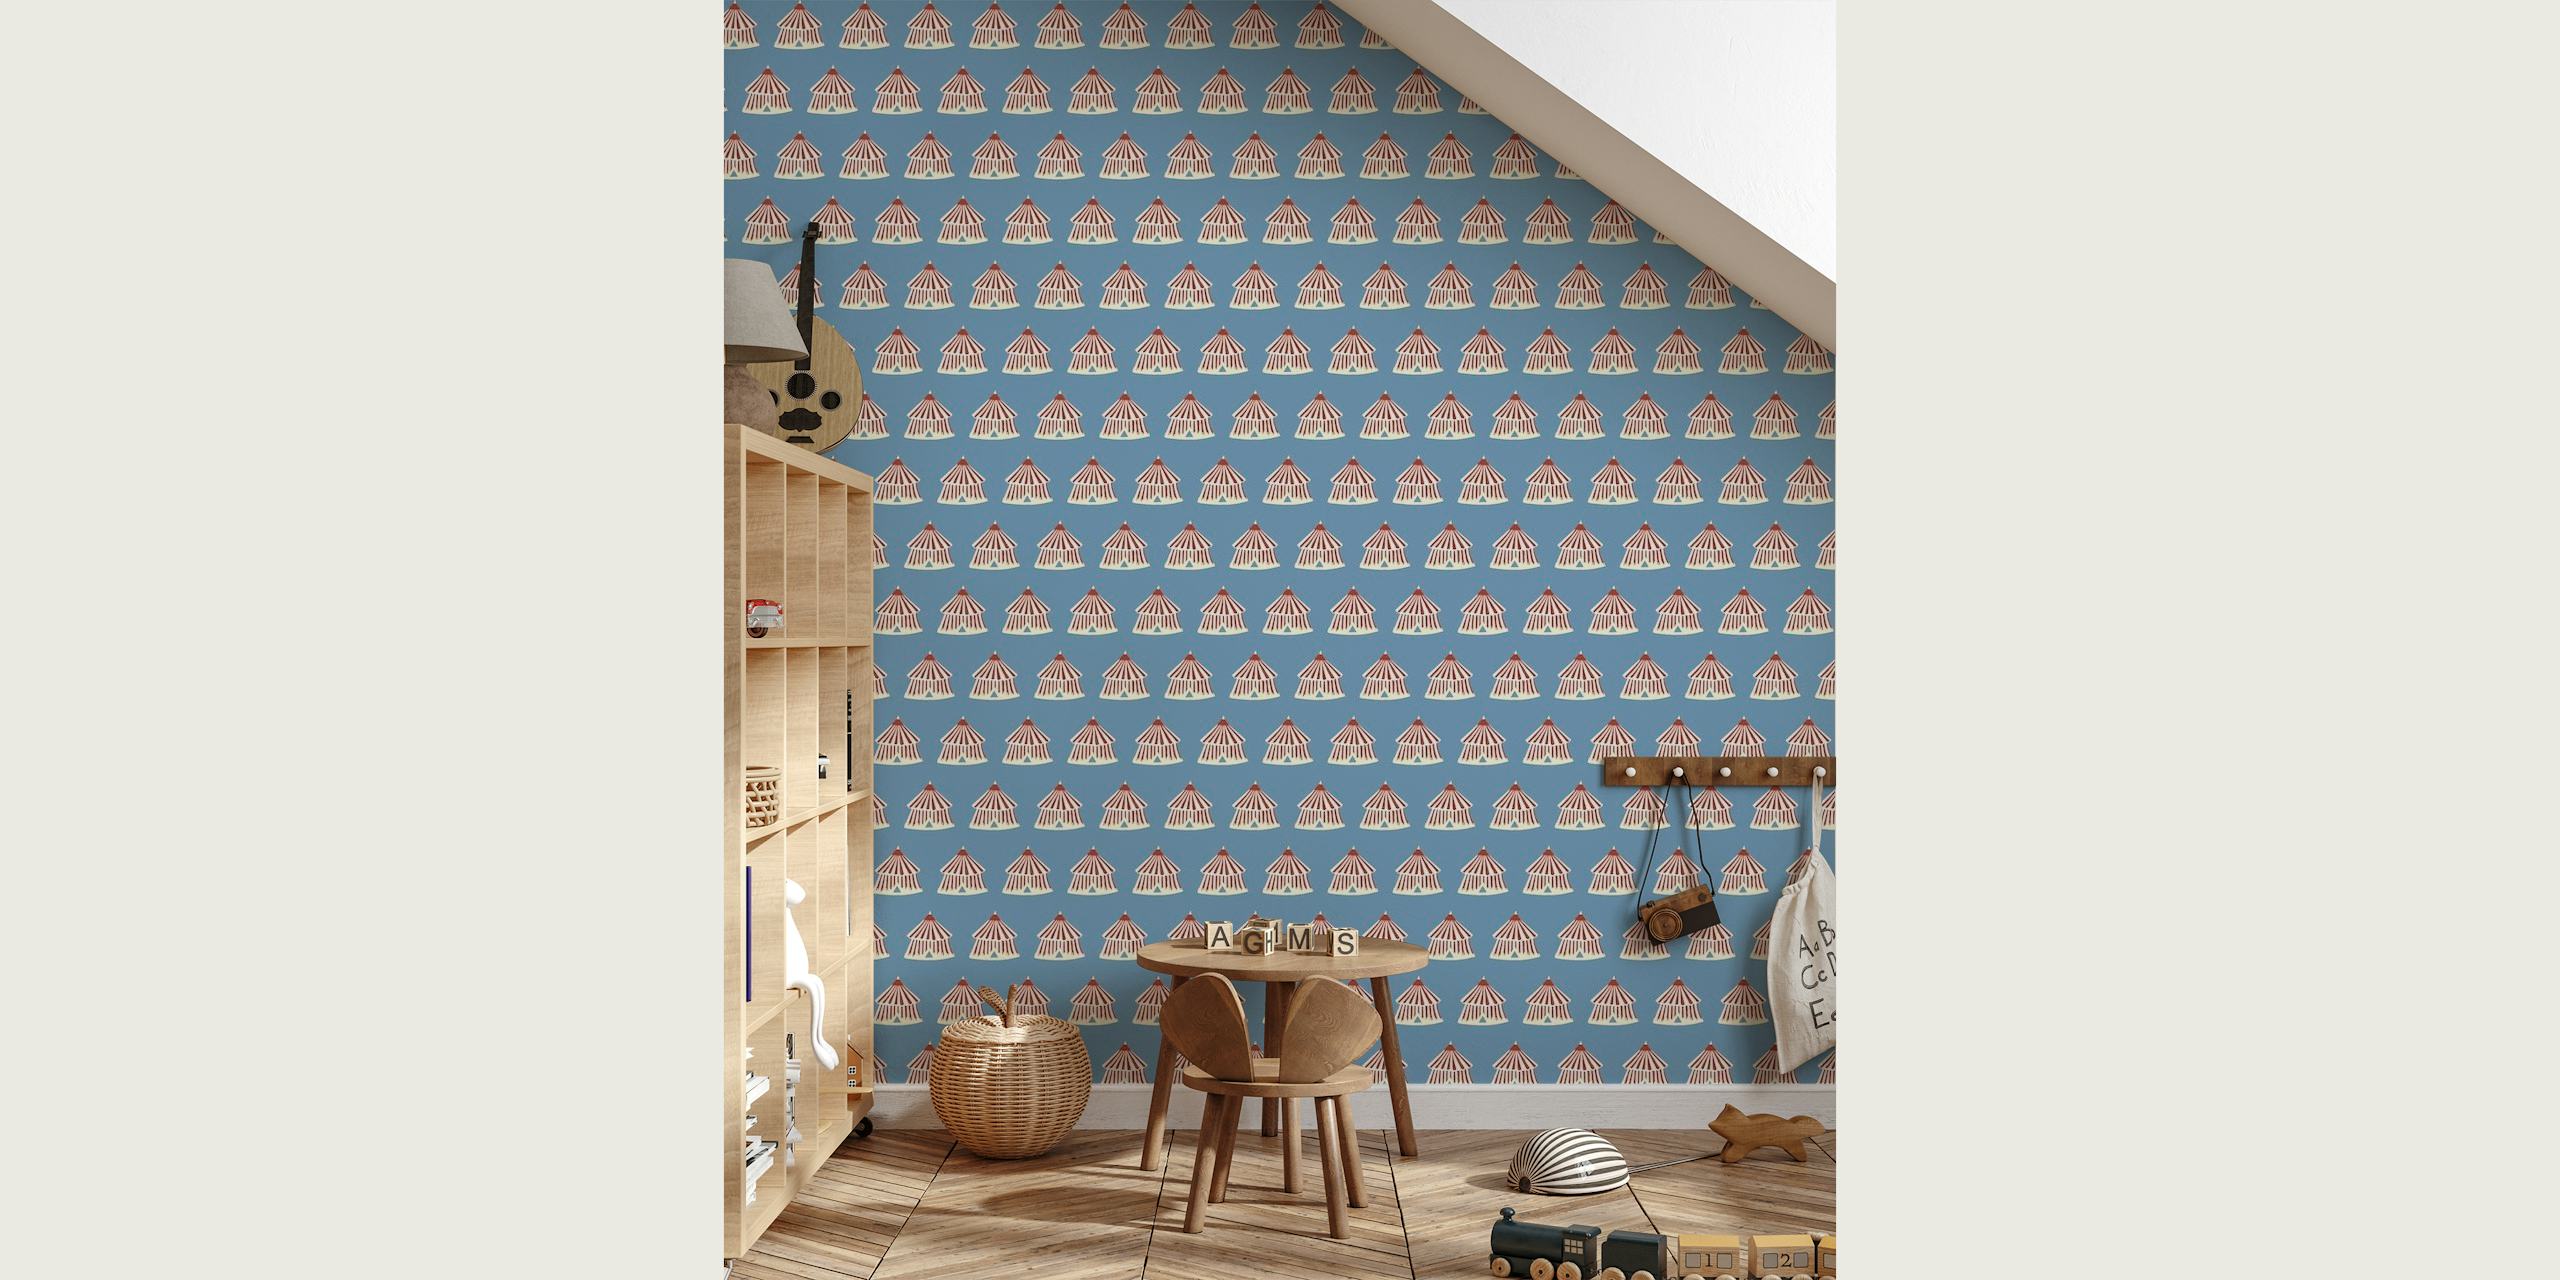 Circus-themed wall mural with repeating pattern of circus tents on a blue background